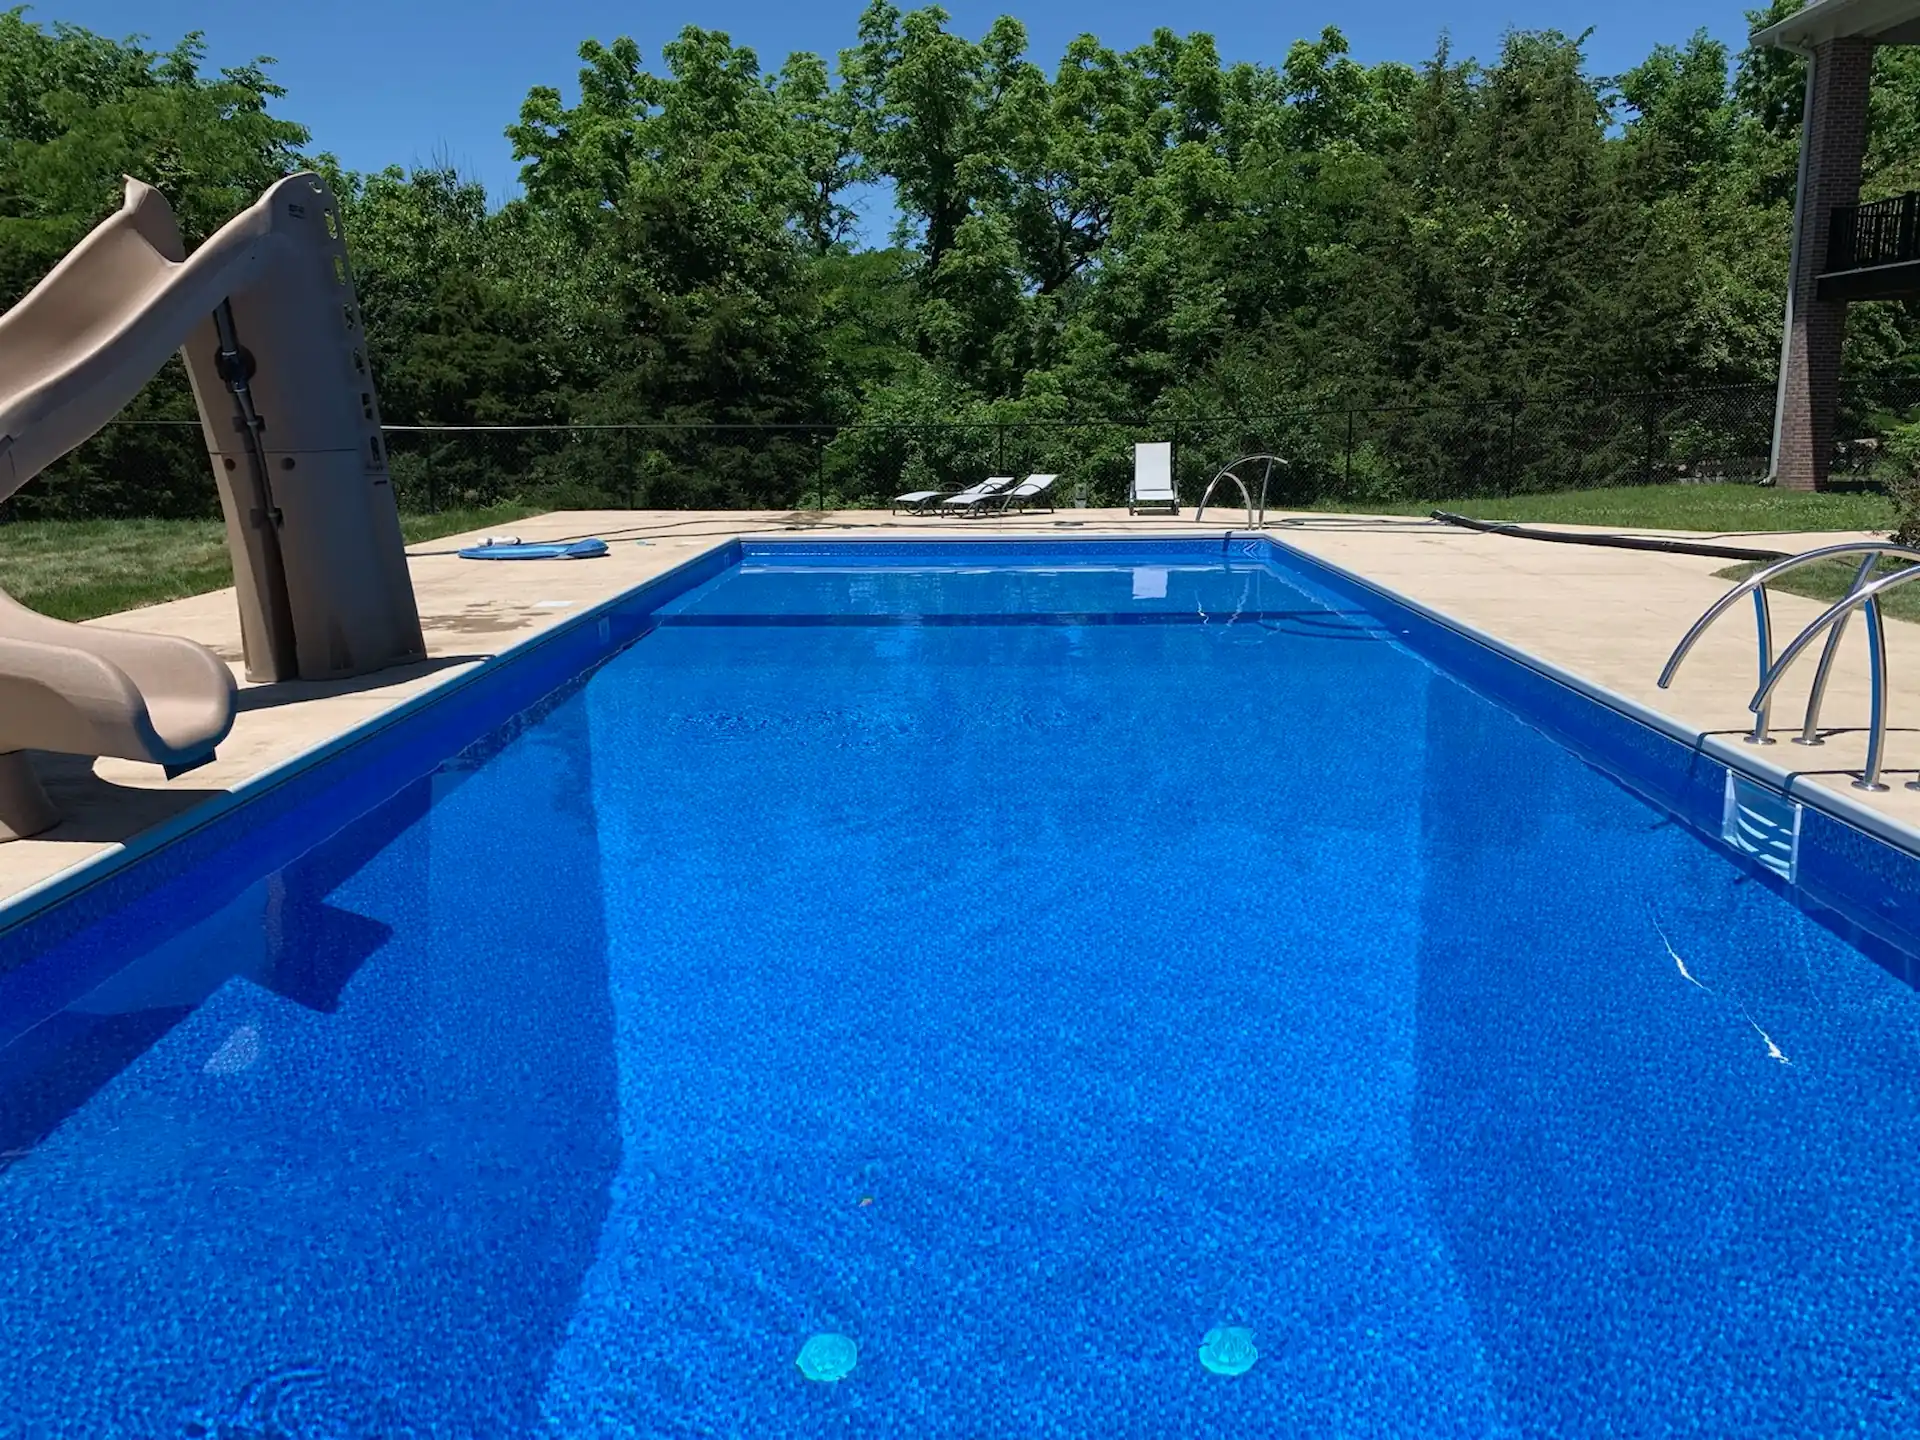 A rectangular inground pool with a blue liner sits in the sunlight. Pool maintenance is essential to preserving the look and functionality of pools like these.